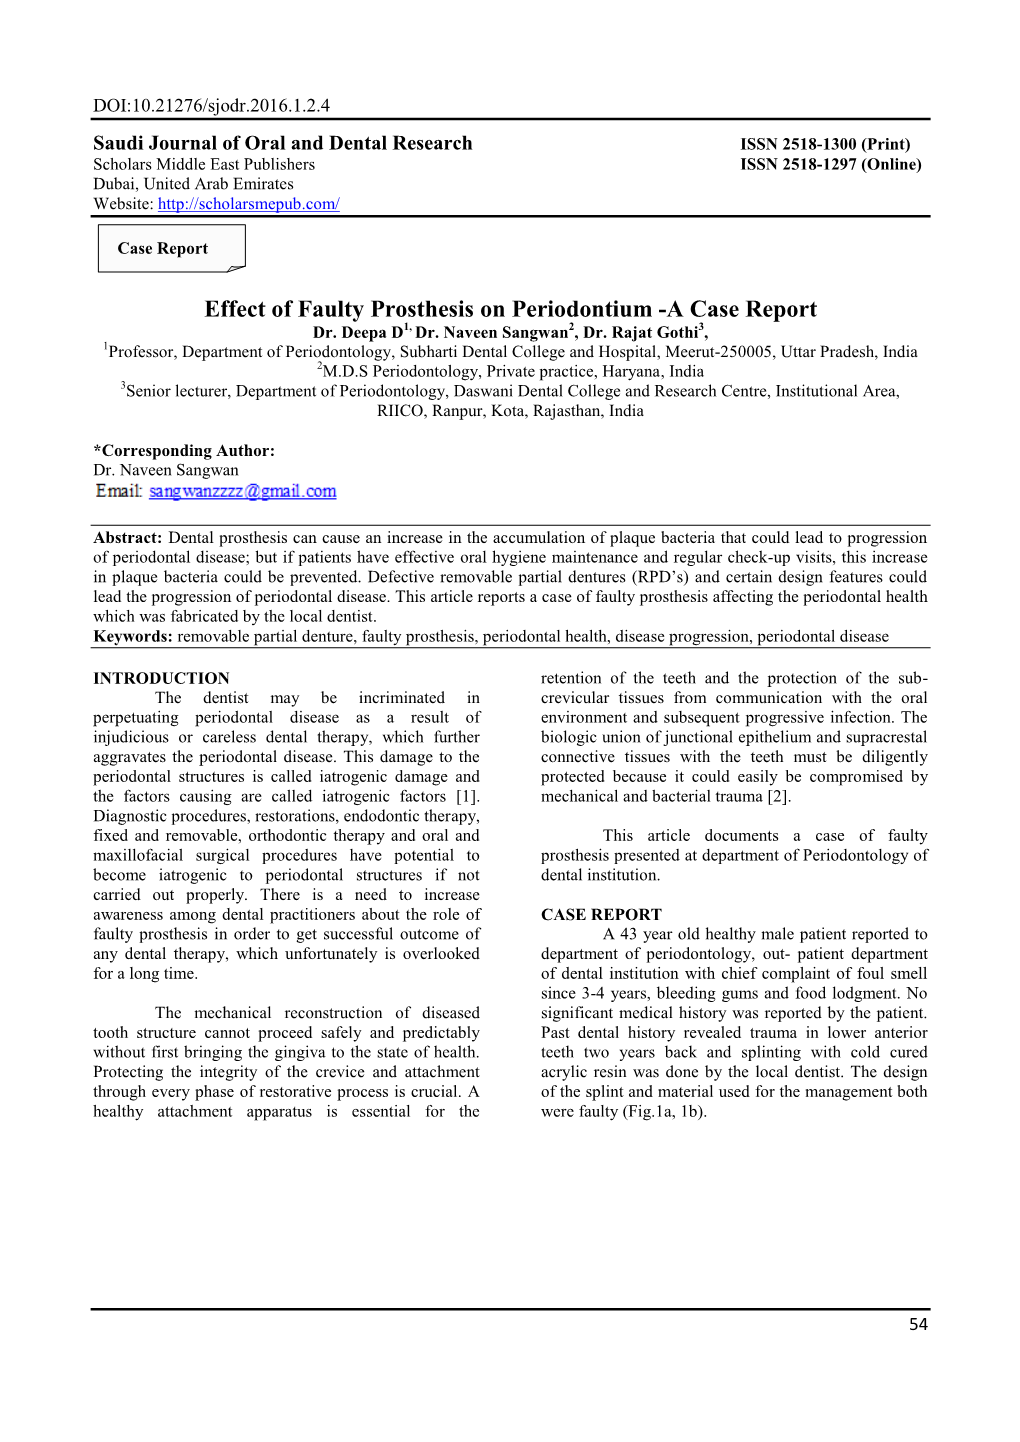 Effect of Faulty Prosthesis on Periodontium -A Case Report Dr